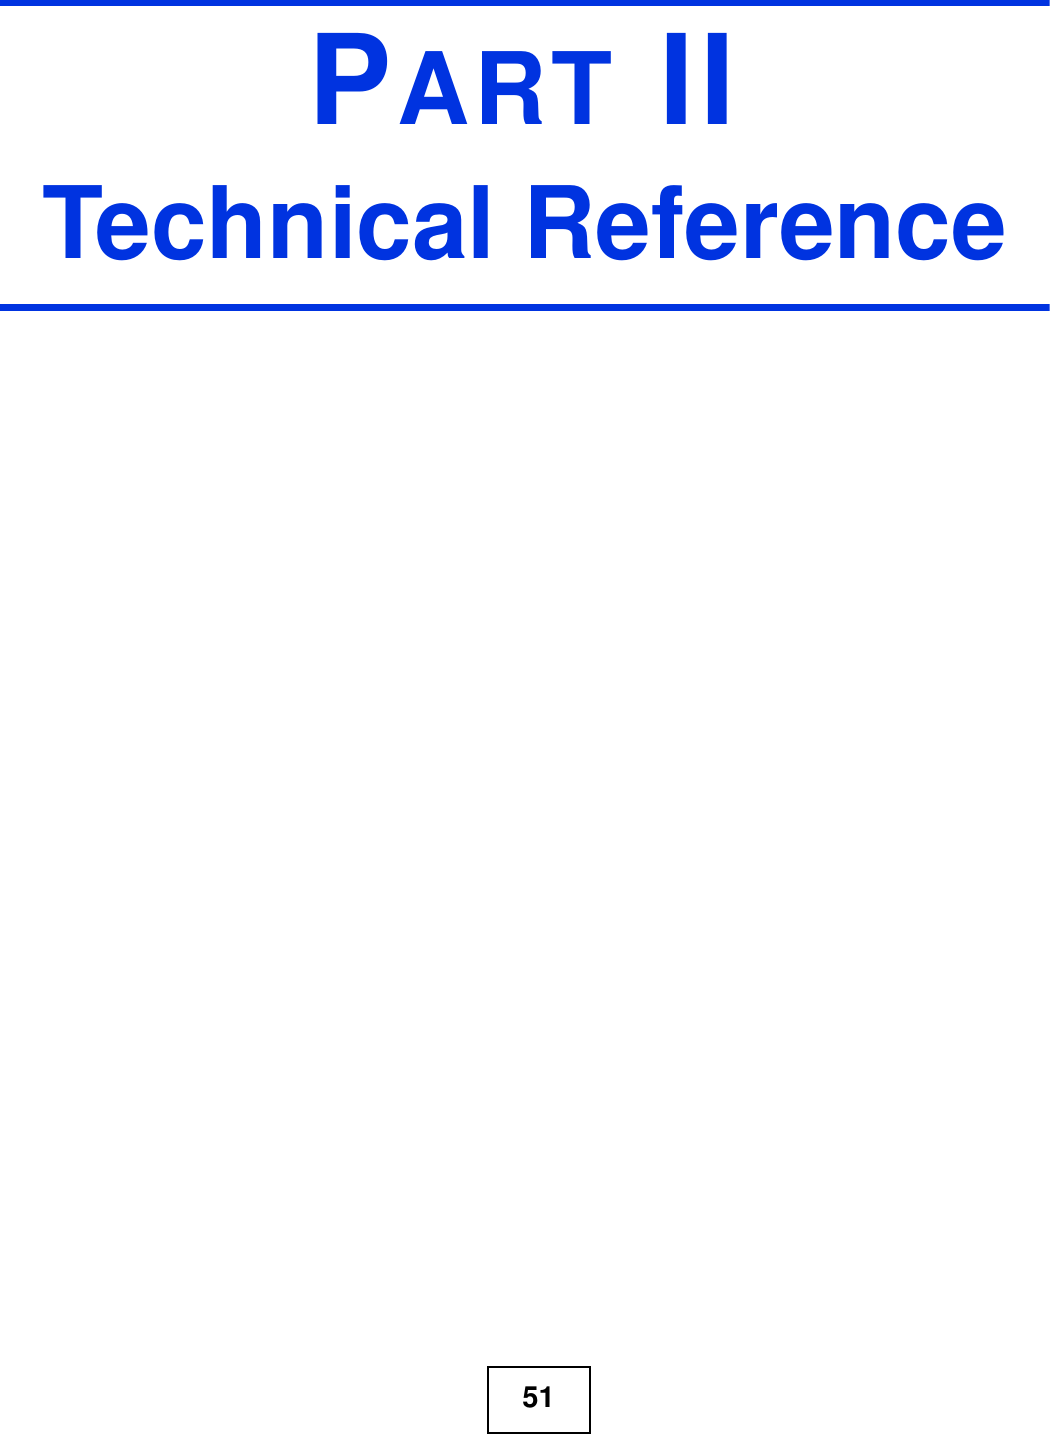 51PART IITechnical Reference